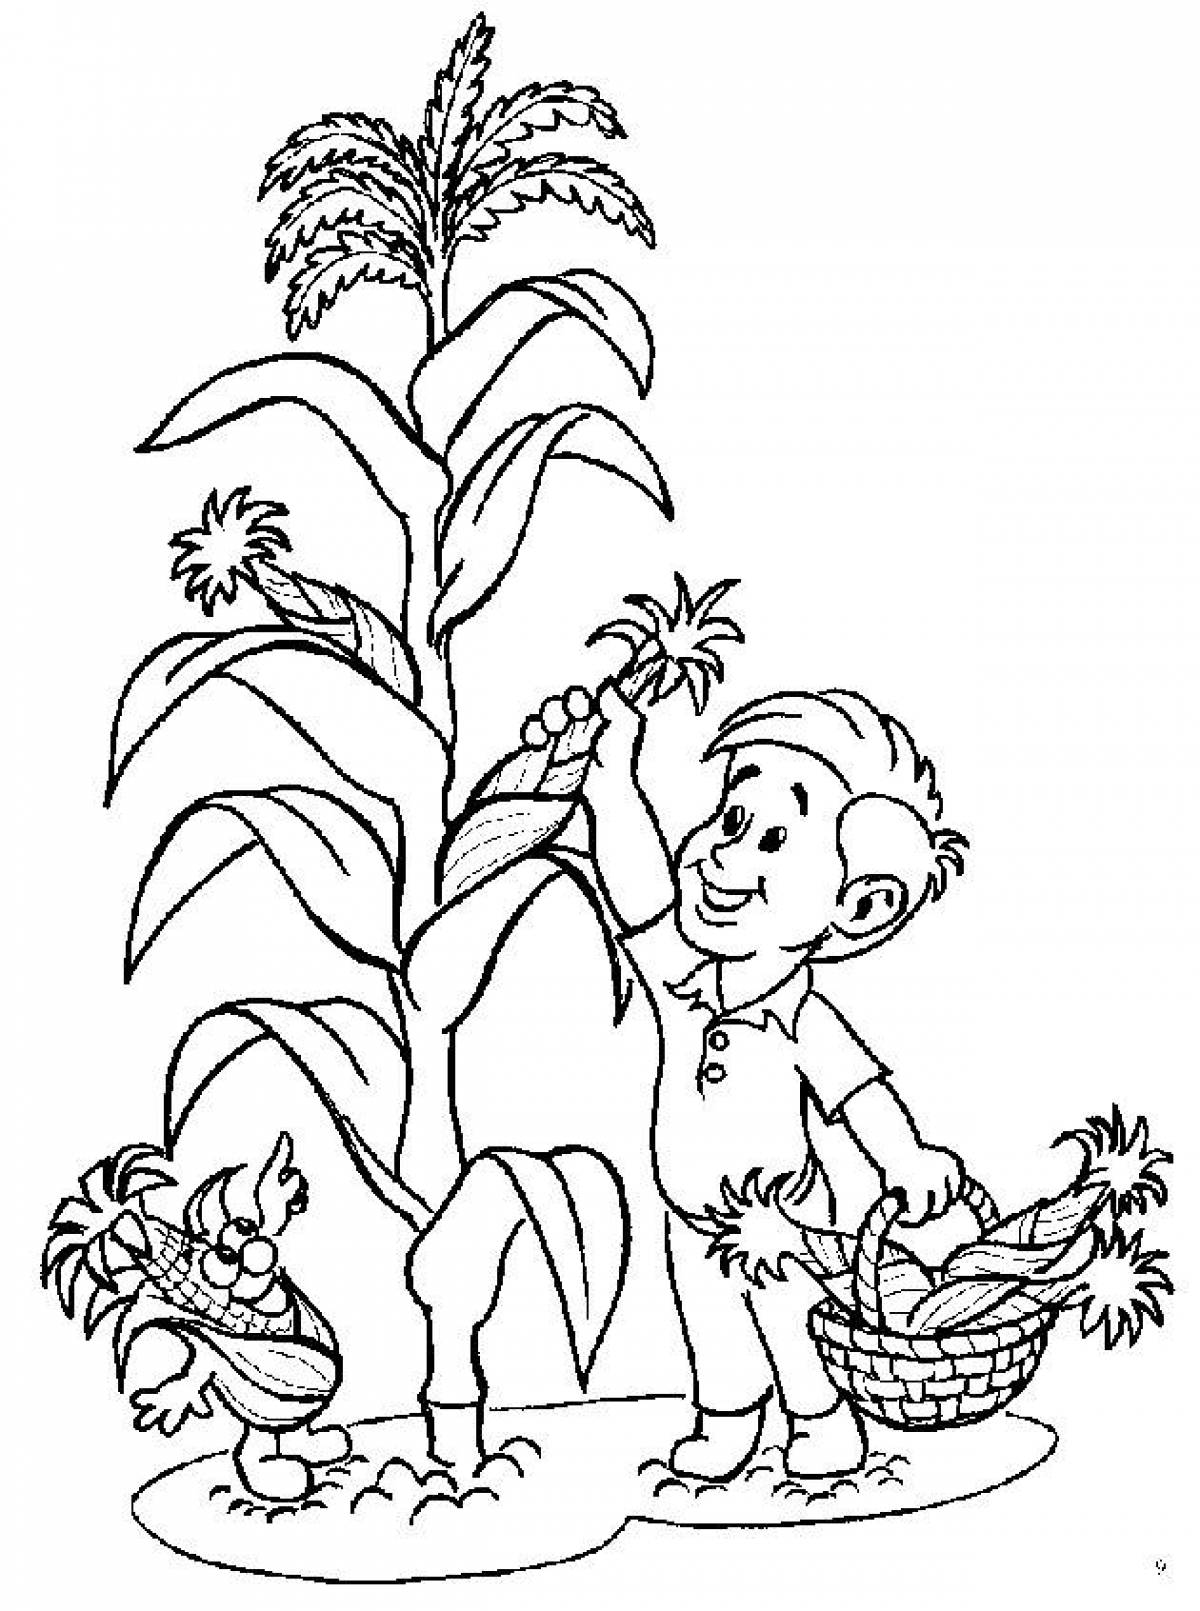 Plant and man